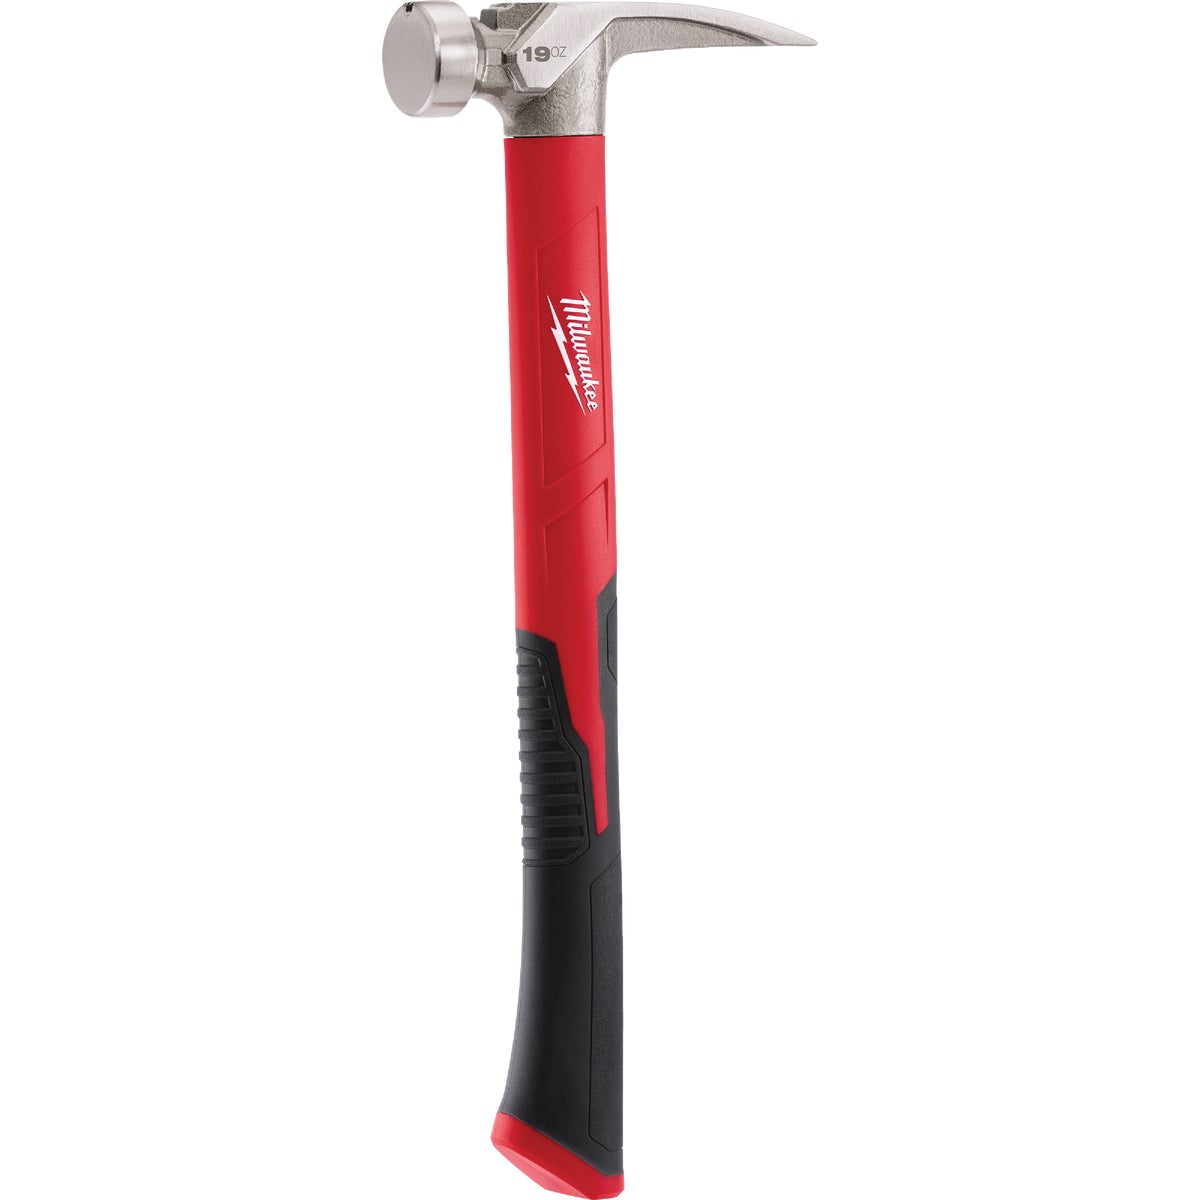 Item 302975, Designed with a durable poly/fiberglass handle and over-molded to help 